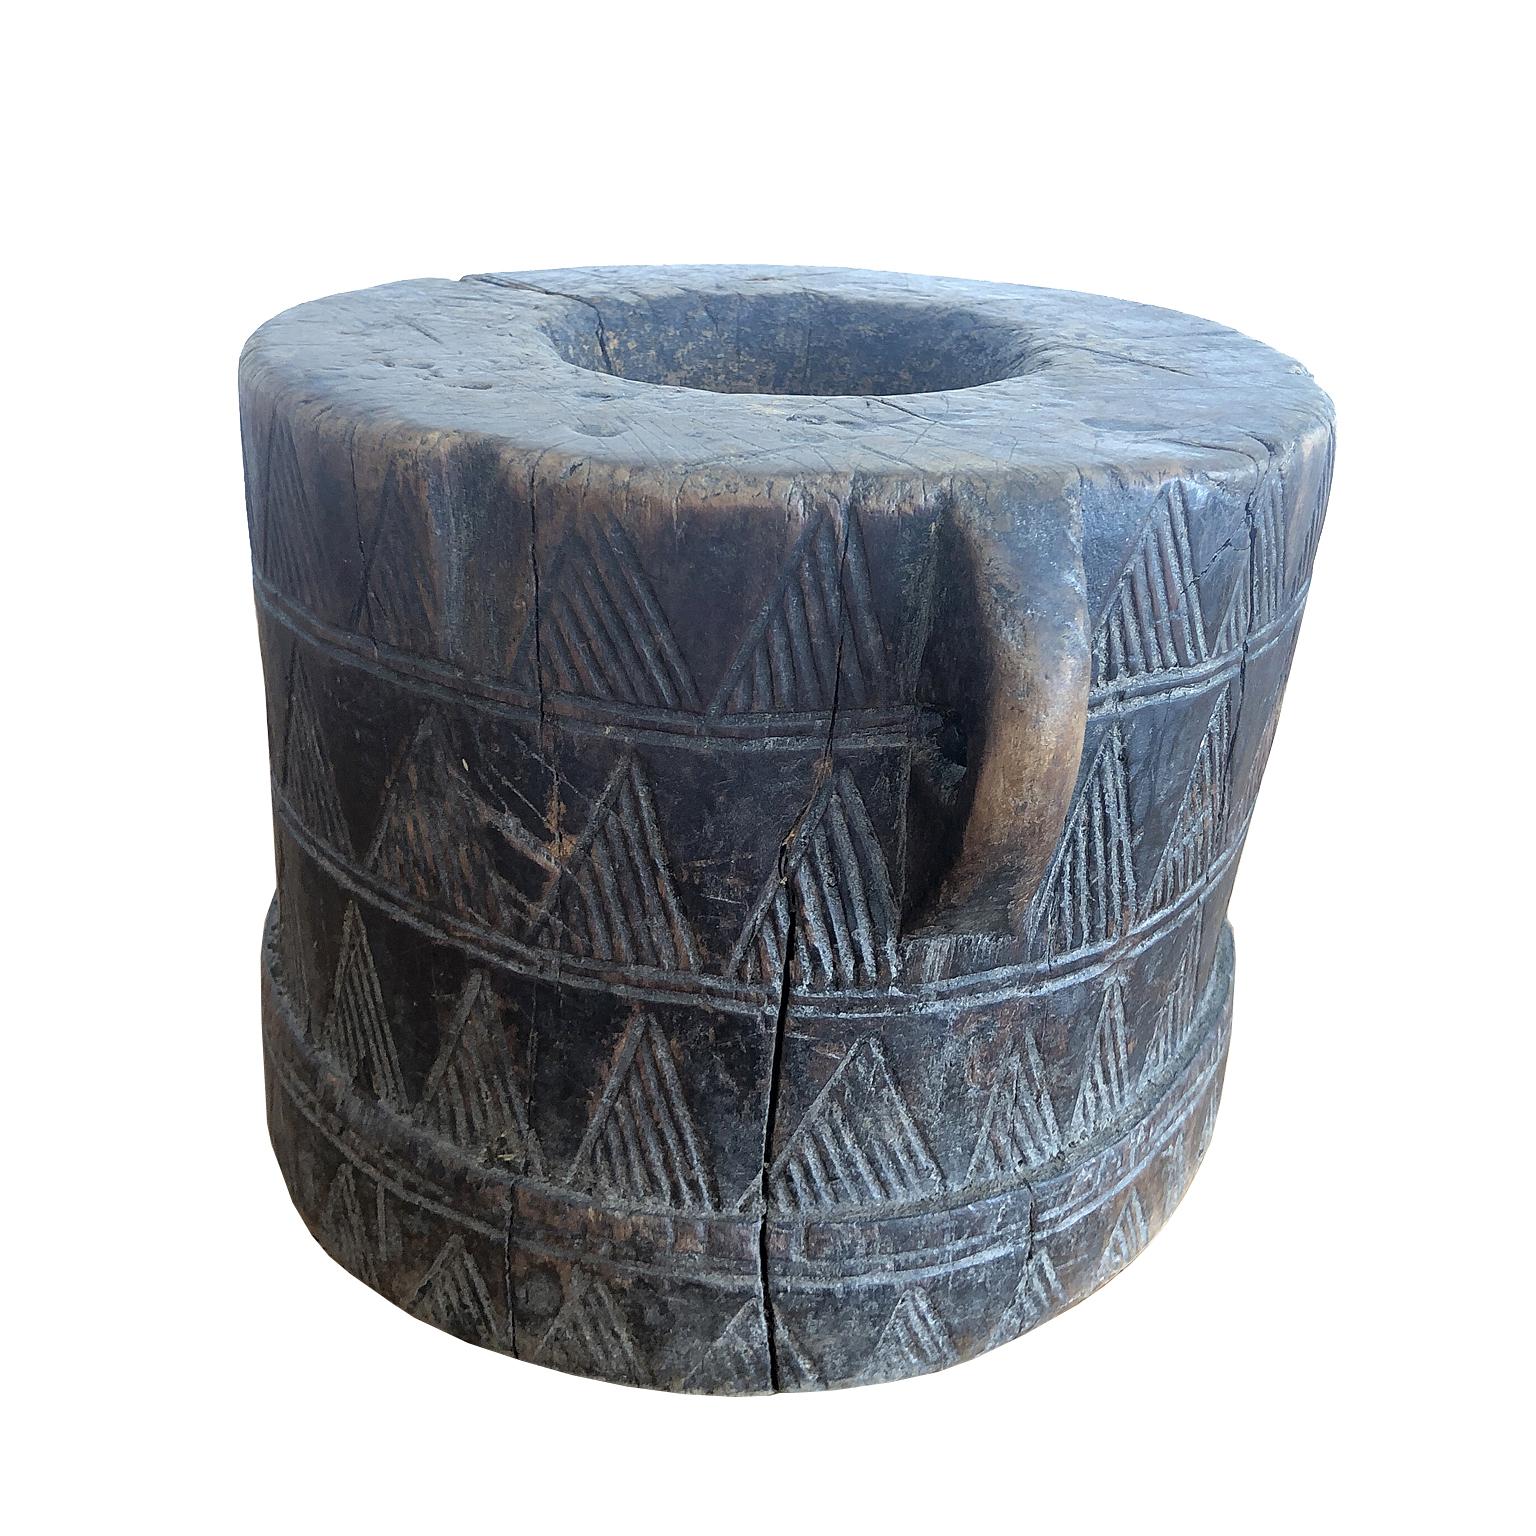 Hand-Carved African Tribal Coffee Mortar in Carved Wood from the Kaffa People in Ethiopia